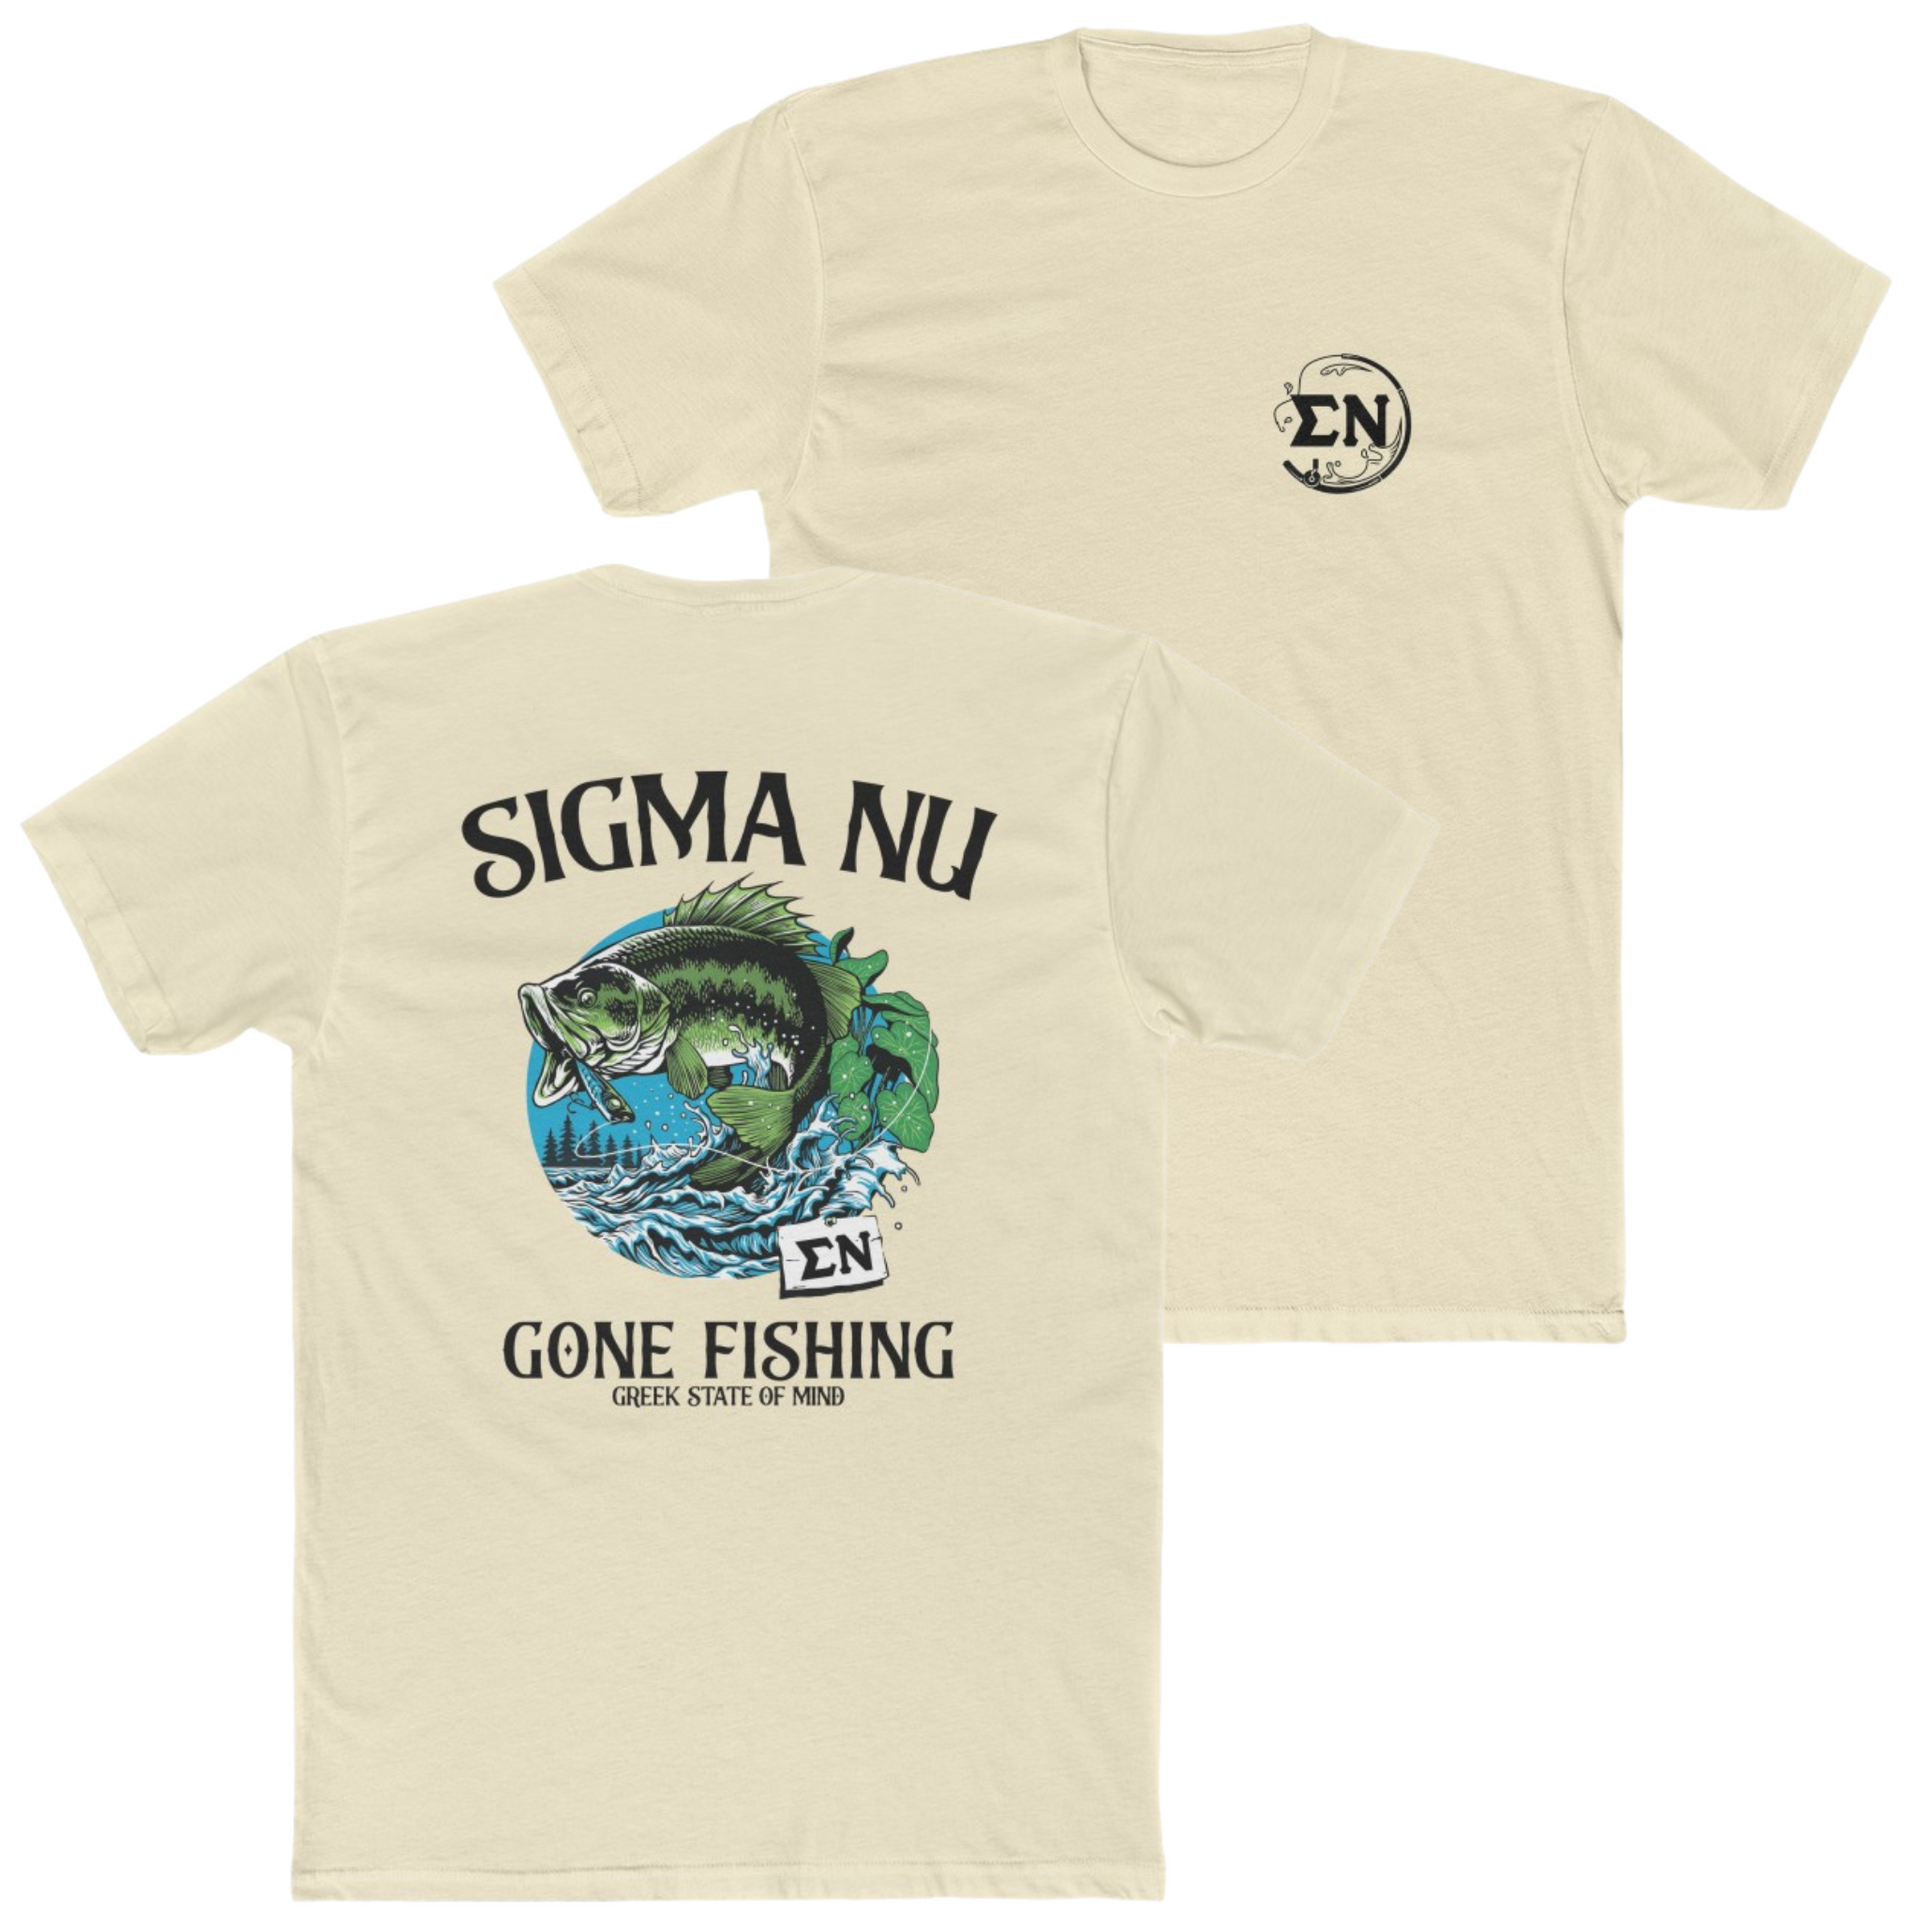 Natural Sigma Nu Graphic T-Shirt | Gone Fishing | Sigma Nu Clothing, Apparel and Merchandise 